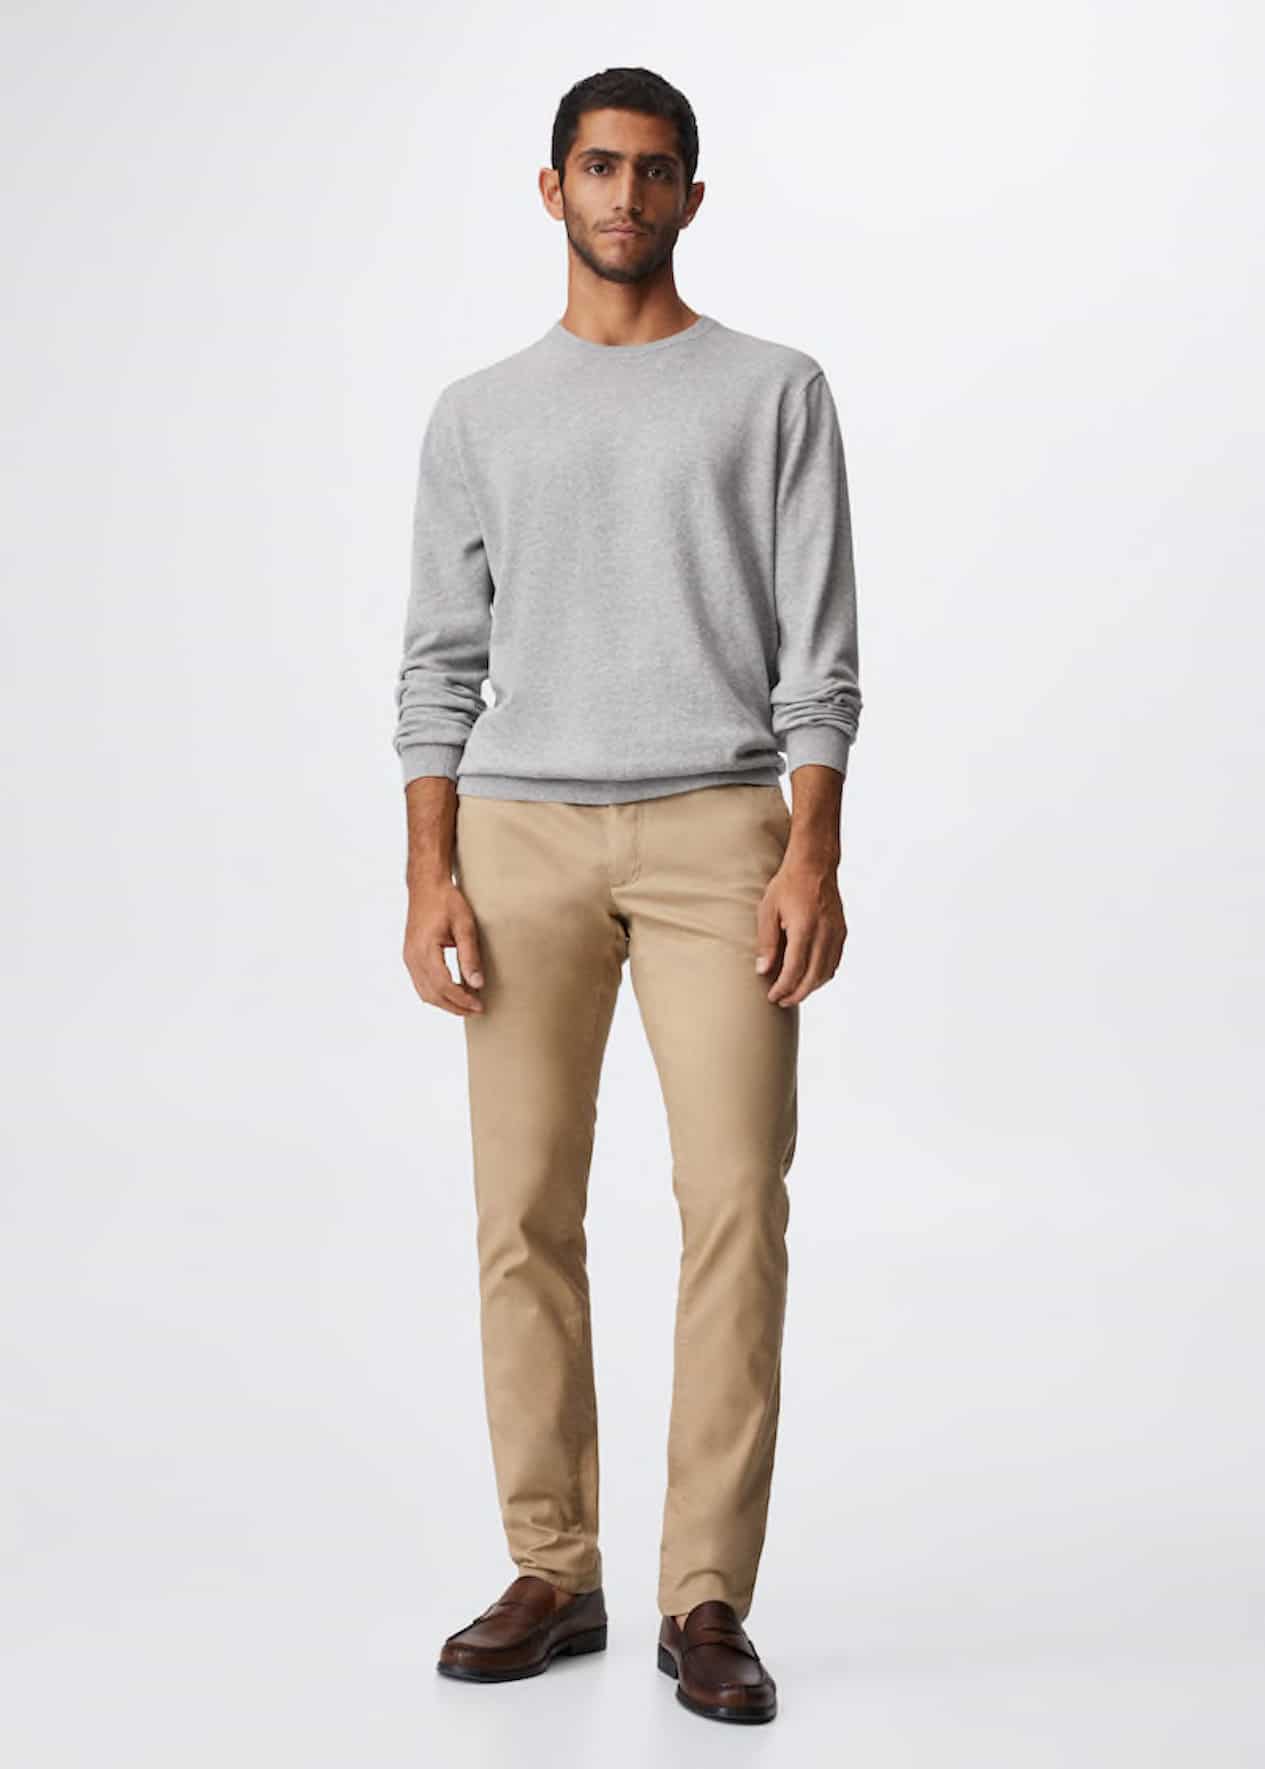 image of a man wearing a grey sweater, khaki pants, and brown shoes